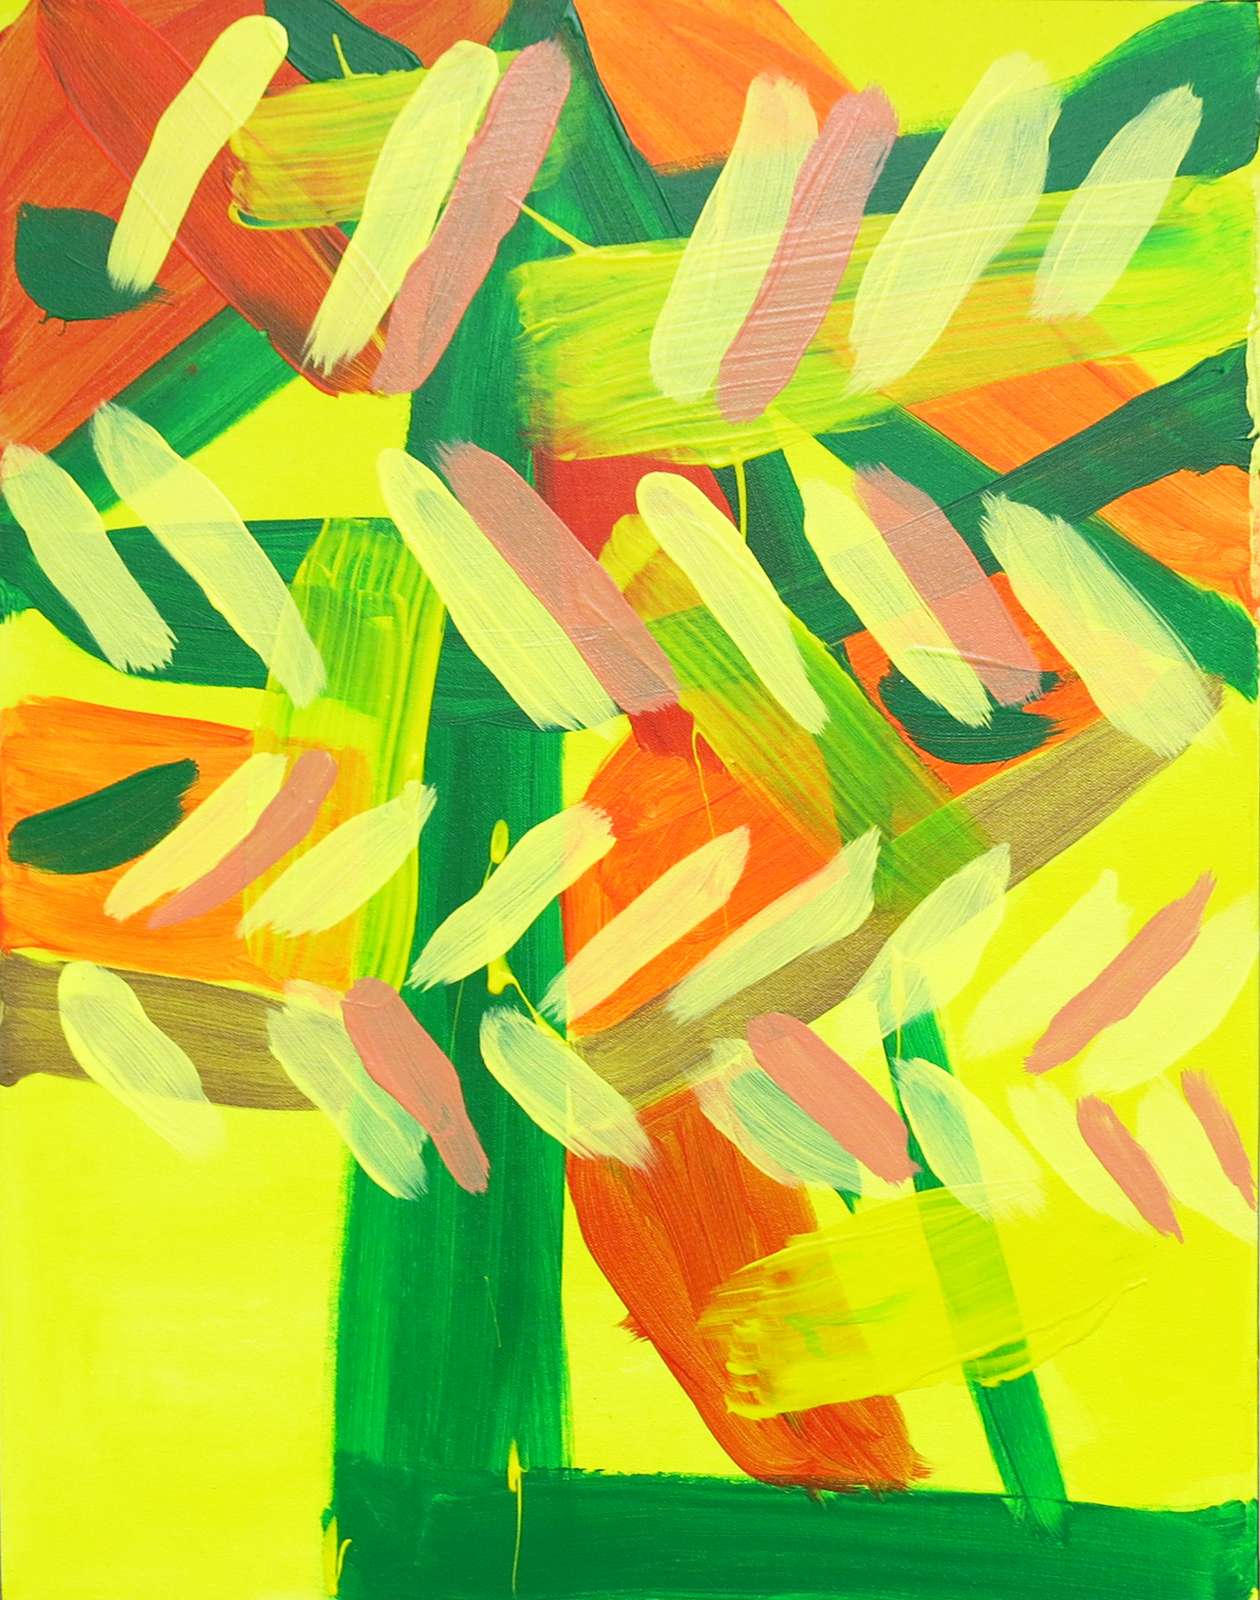 Yellows, oranges and greens abstract design painting by Tyler